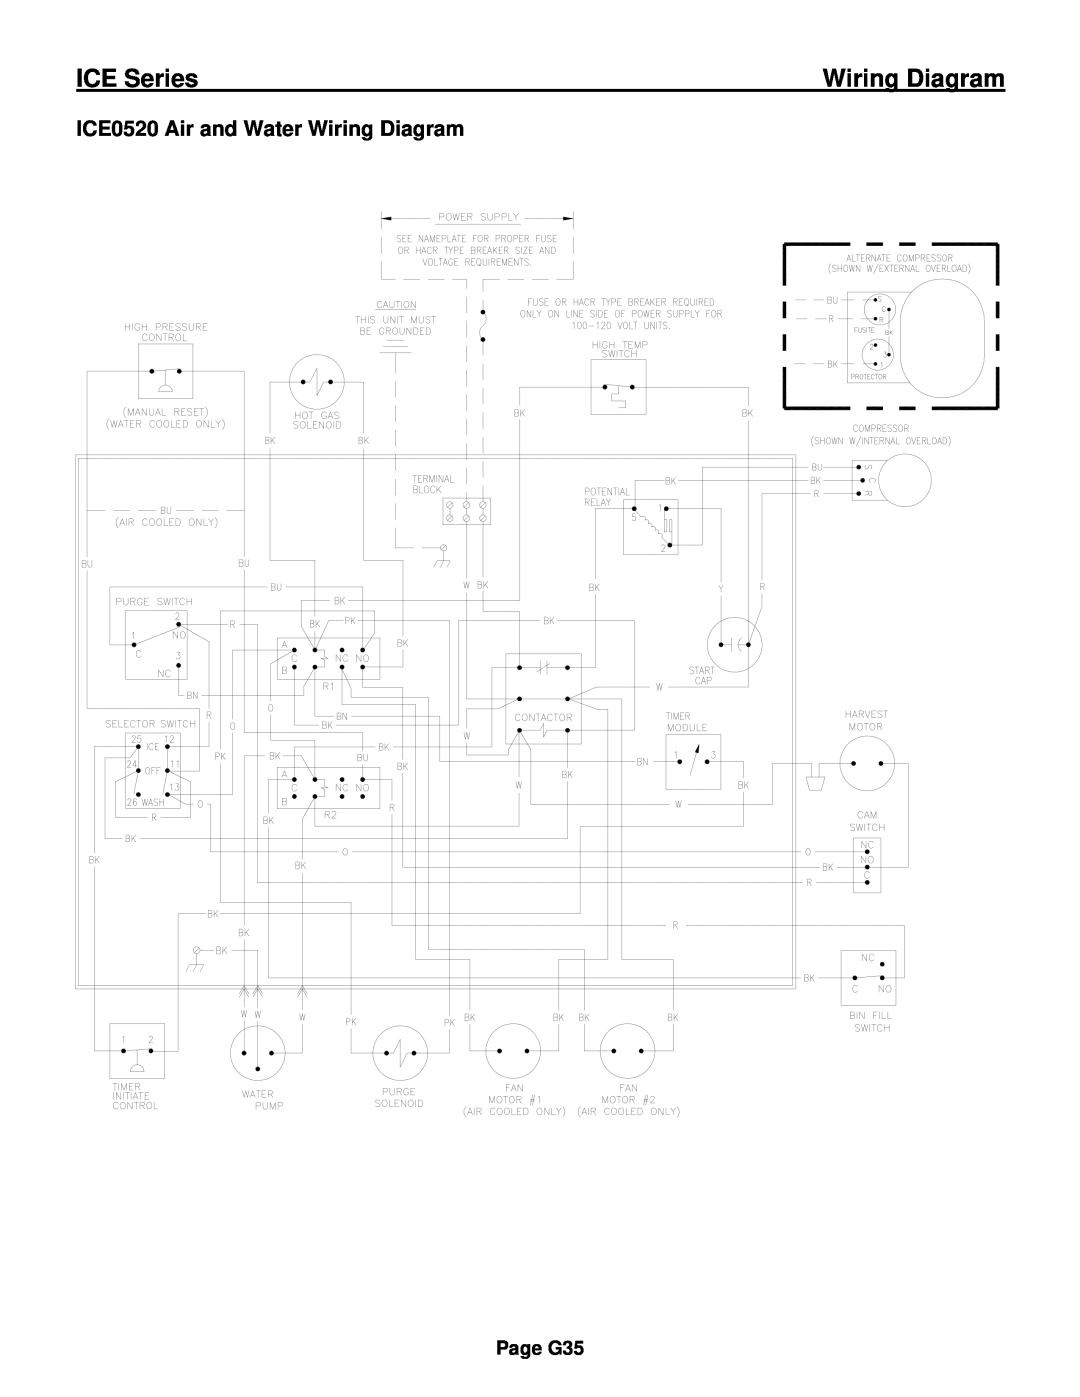 Ice-O-Matic ICE0250 Series installation manual ICE0520 Air and Water Wiring Diagram, ICE Series, Page G35 